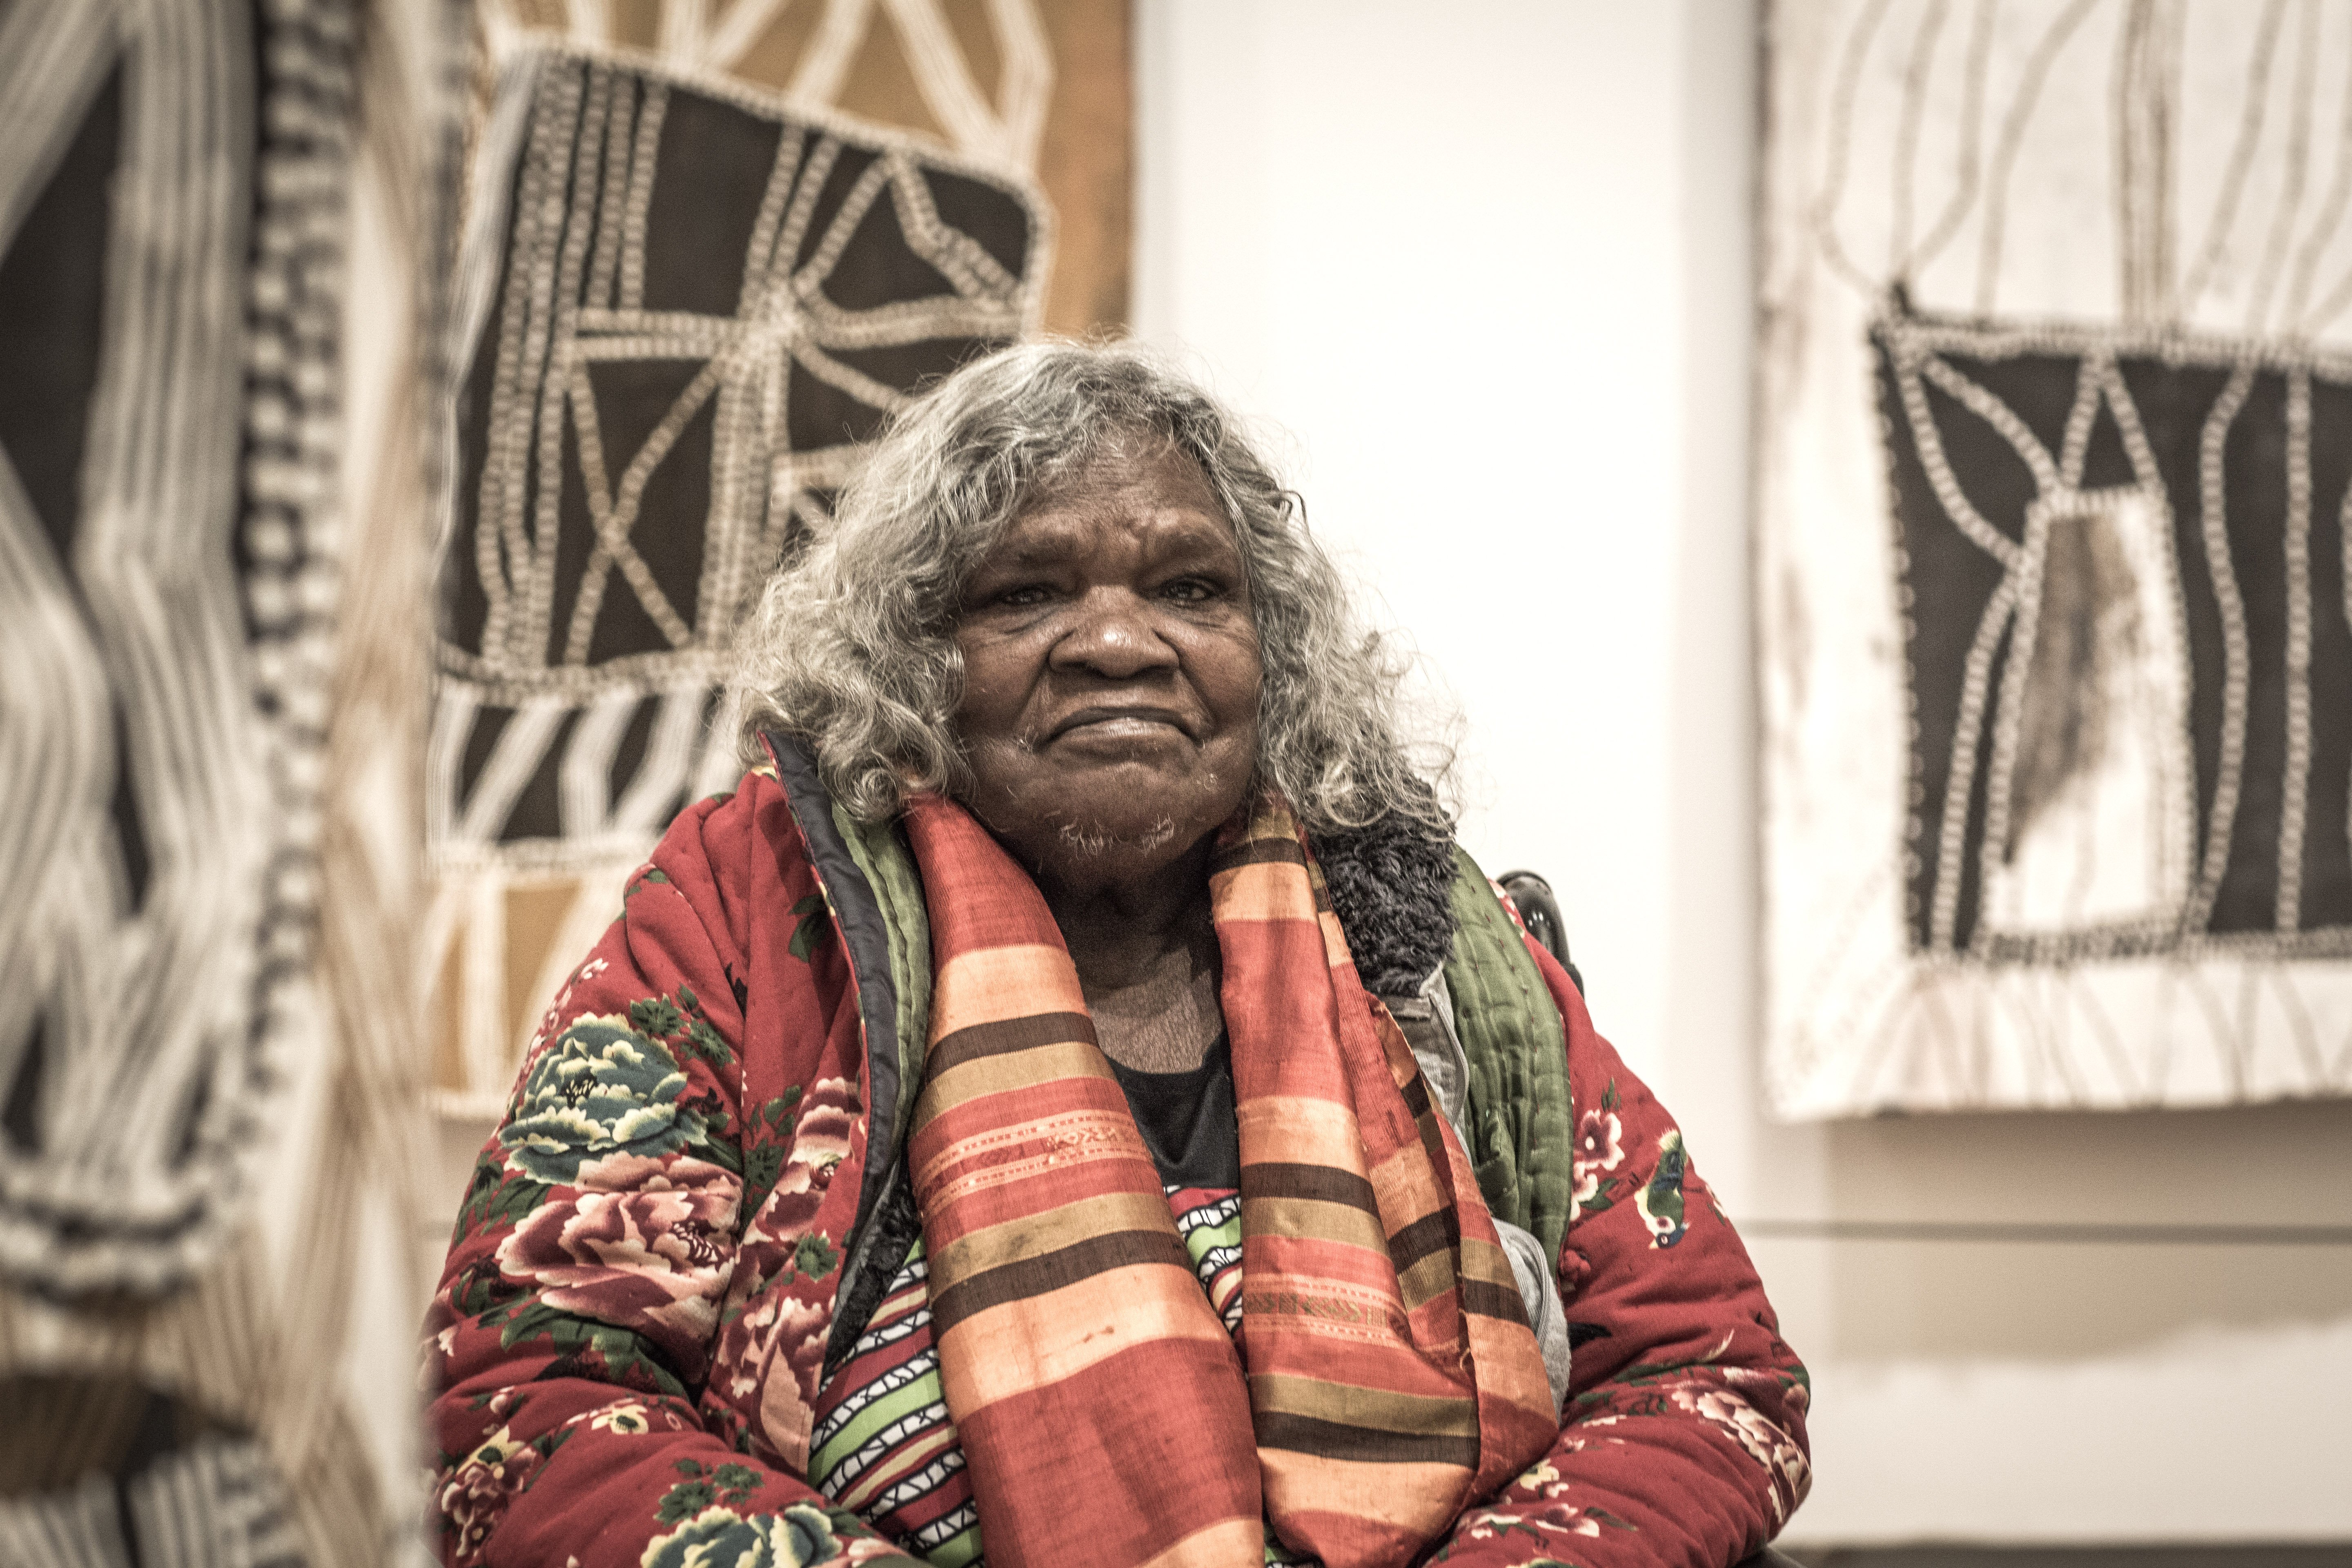 Nonggirna Marawili with her work at the National Gallery of Australia, May 27 2017